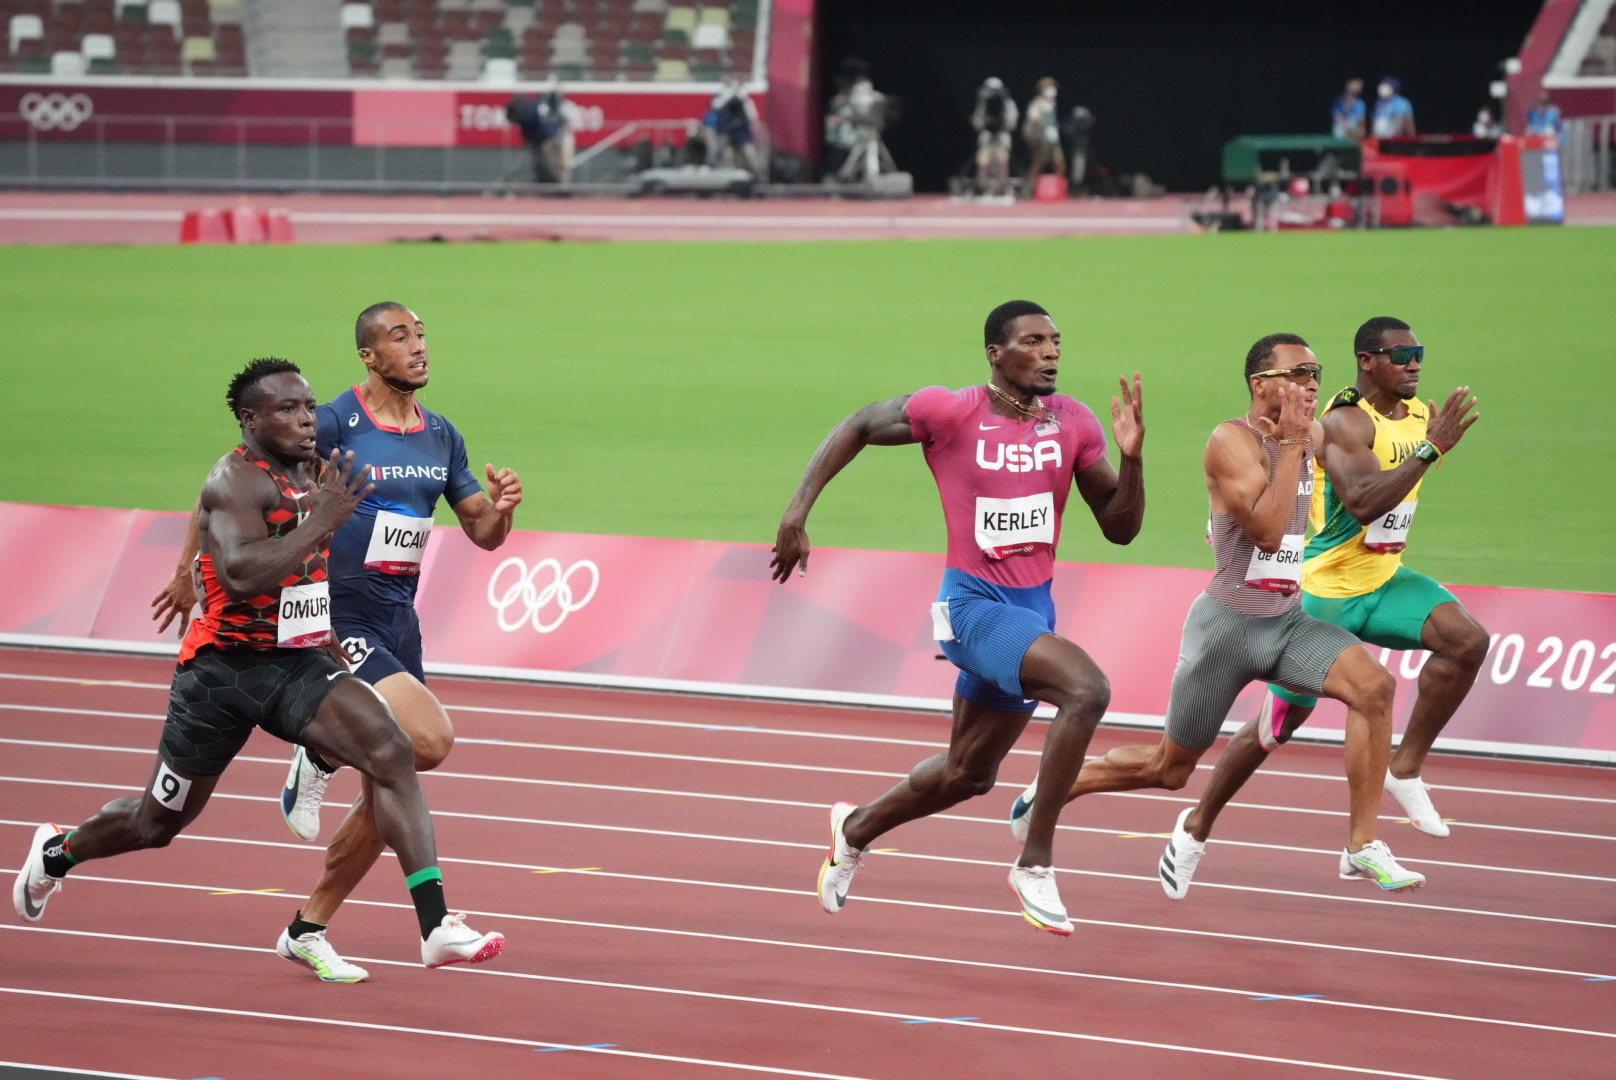 Canada At Tokyo Olympics 2020 Andre De Grasse Wins Bronze In The Men S 100m Final Abtc